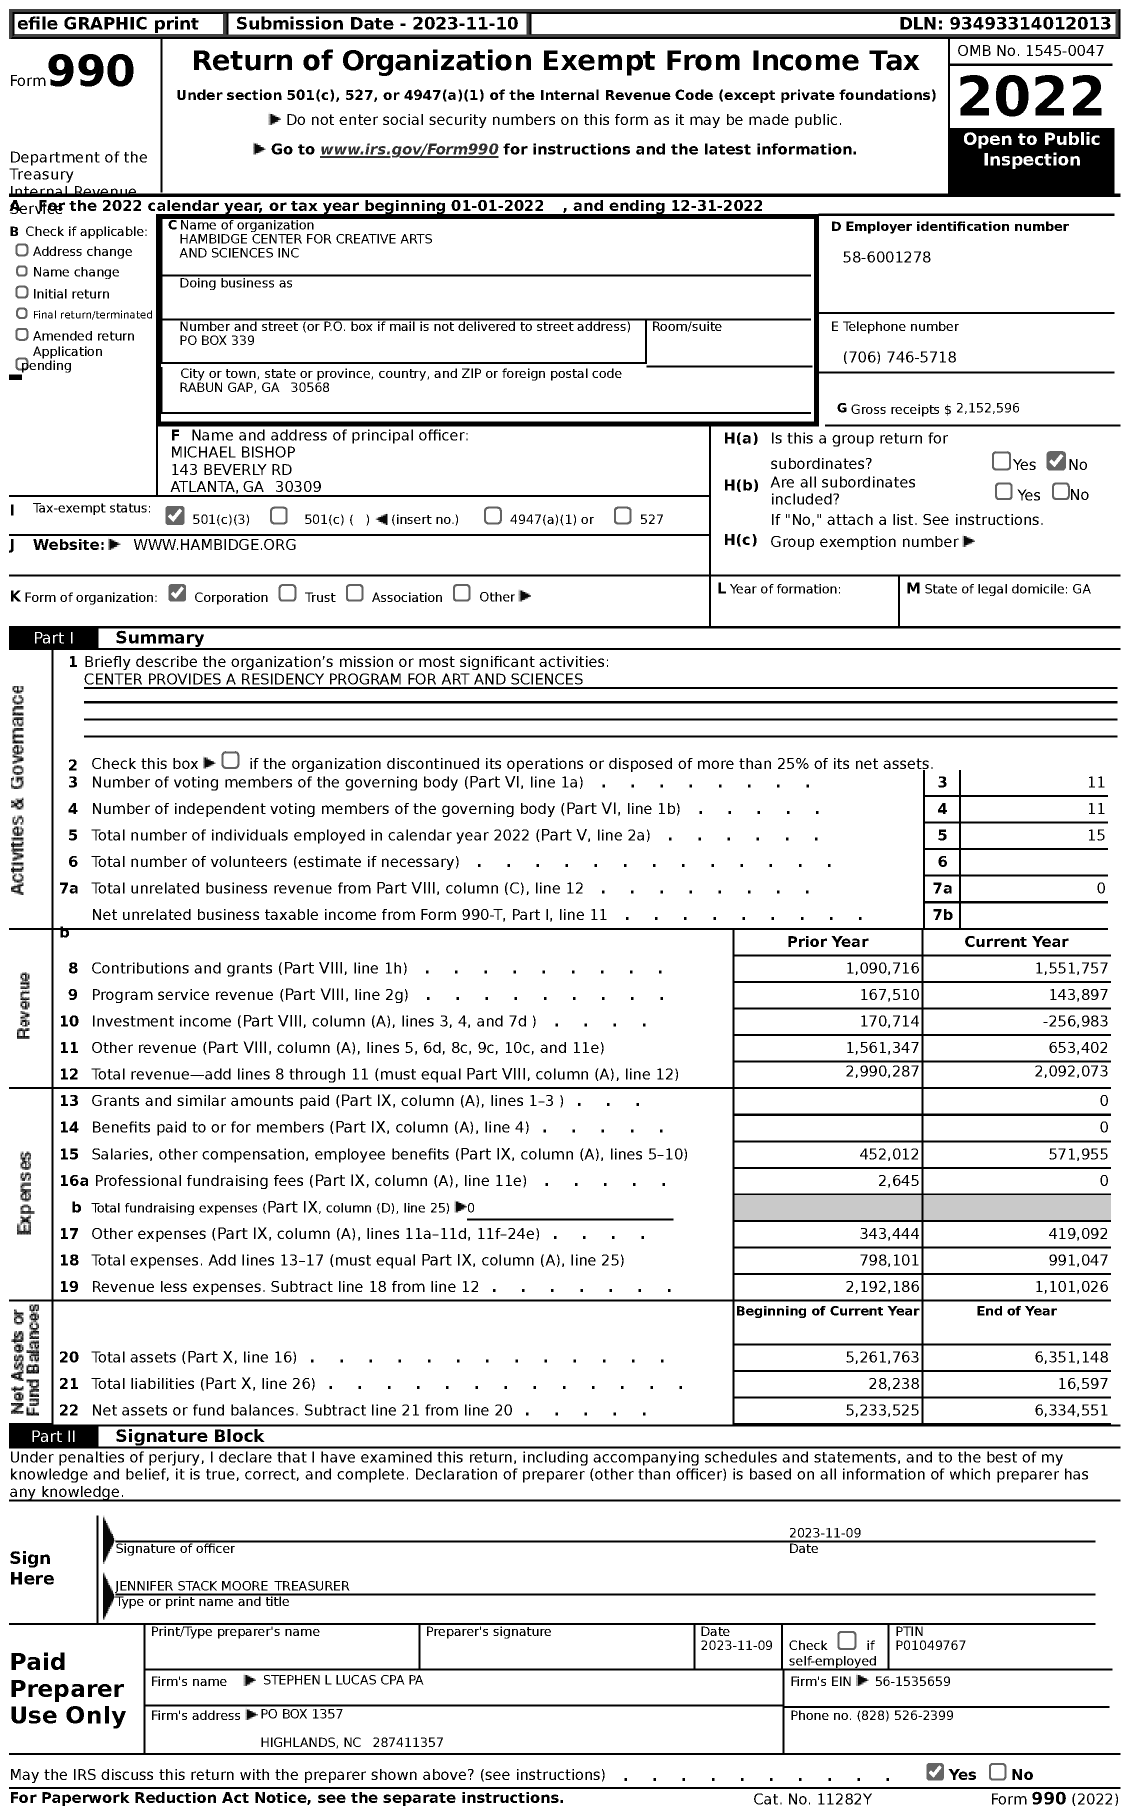 Image of first page of 2022 Form 990 for Hambidge Center for Creative Arts and Sciences